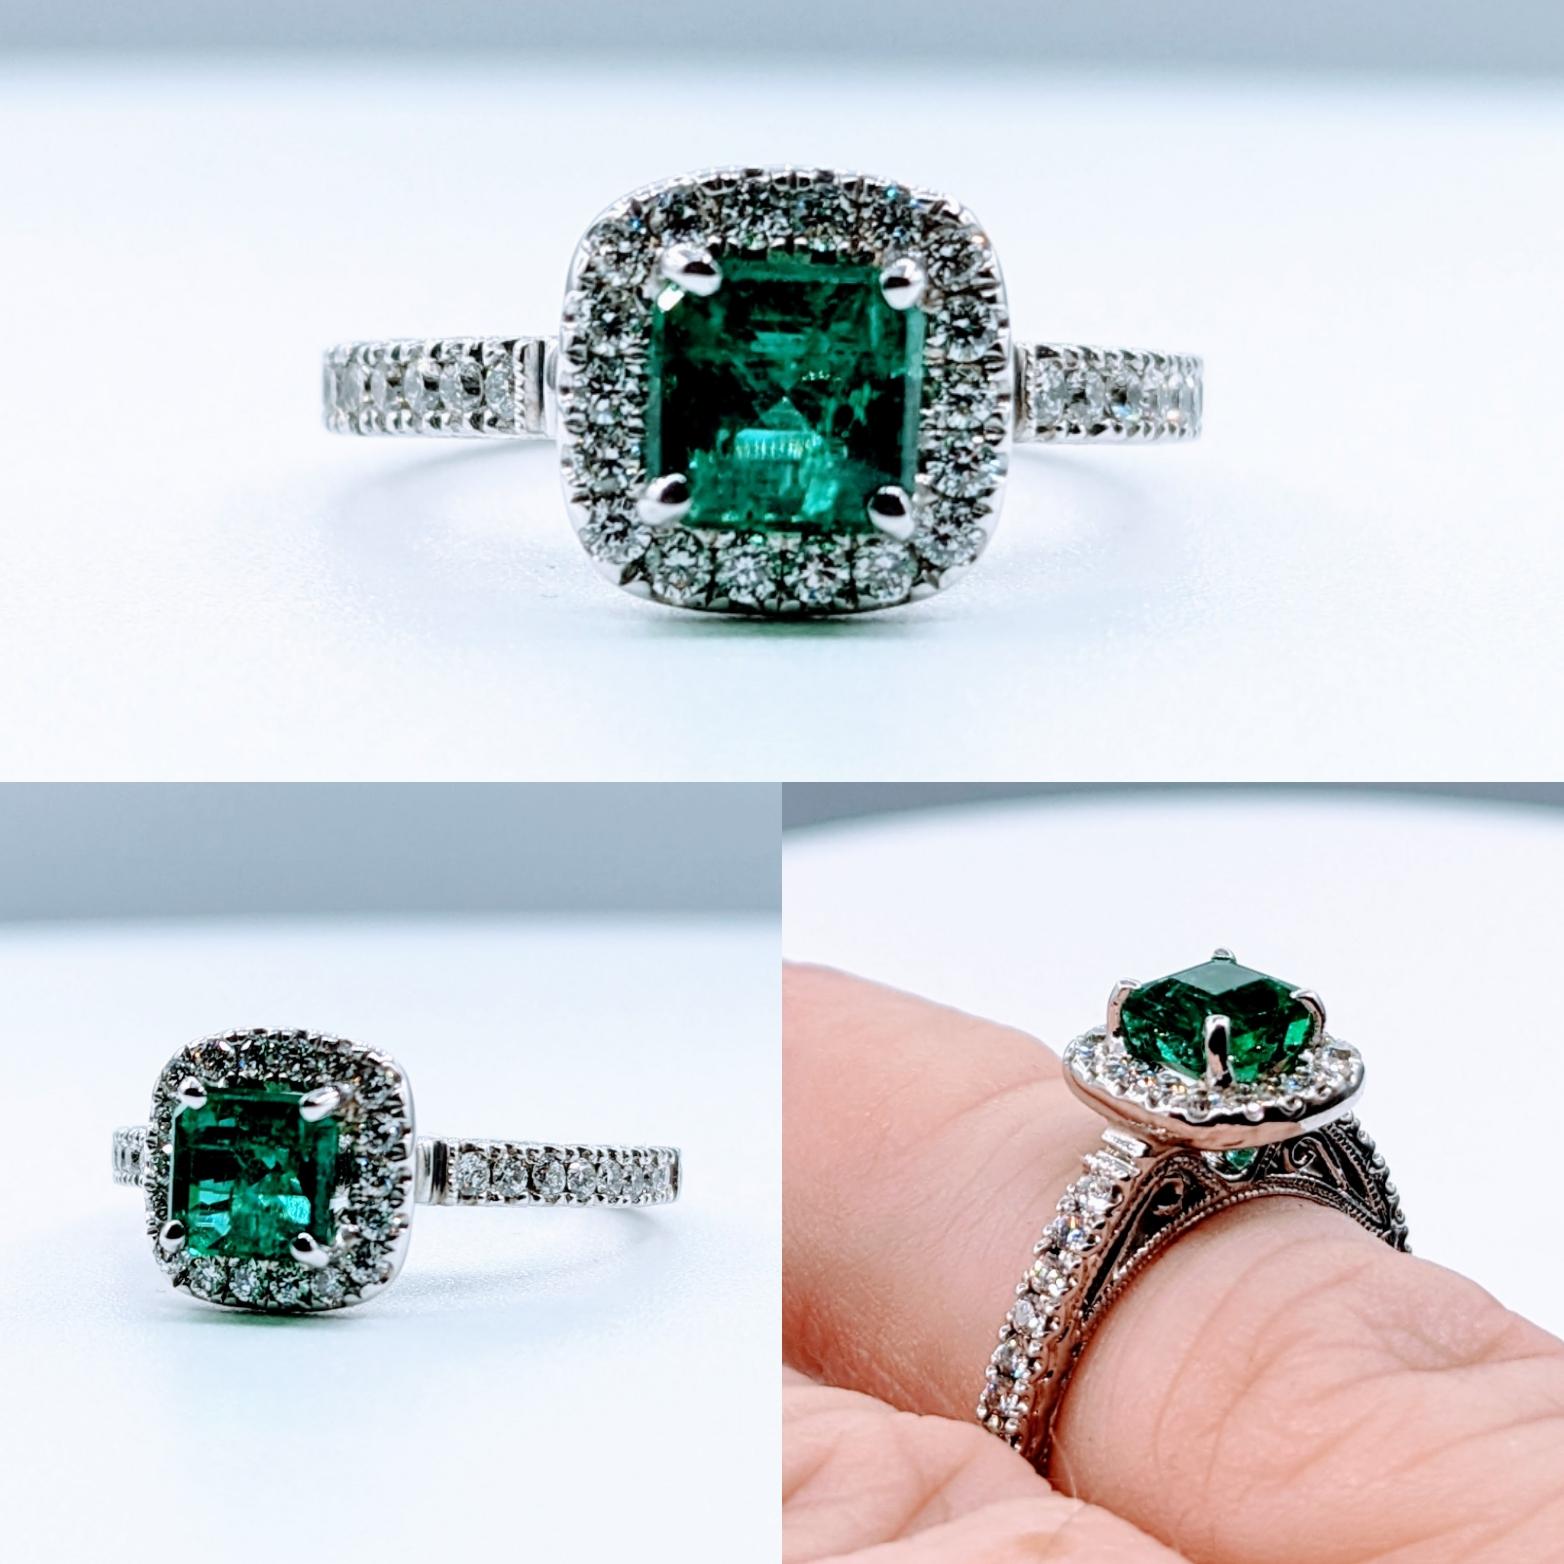 Enchanting Emerald & Diamond Halo Ring

Experience the enchanting beauty of this stunning ring, expertly crafted from 14 karat white gold and adorned with 0.33 carat total weight diamonds that shimmer with SI2-I1 clarity and H color. Adding to its